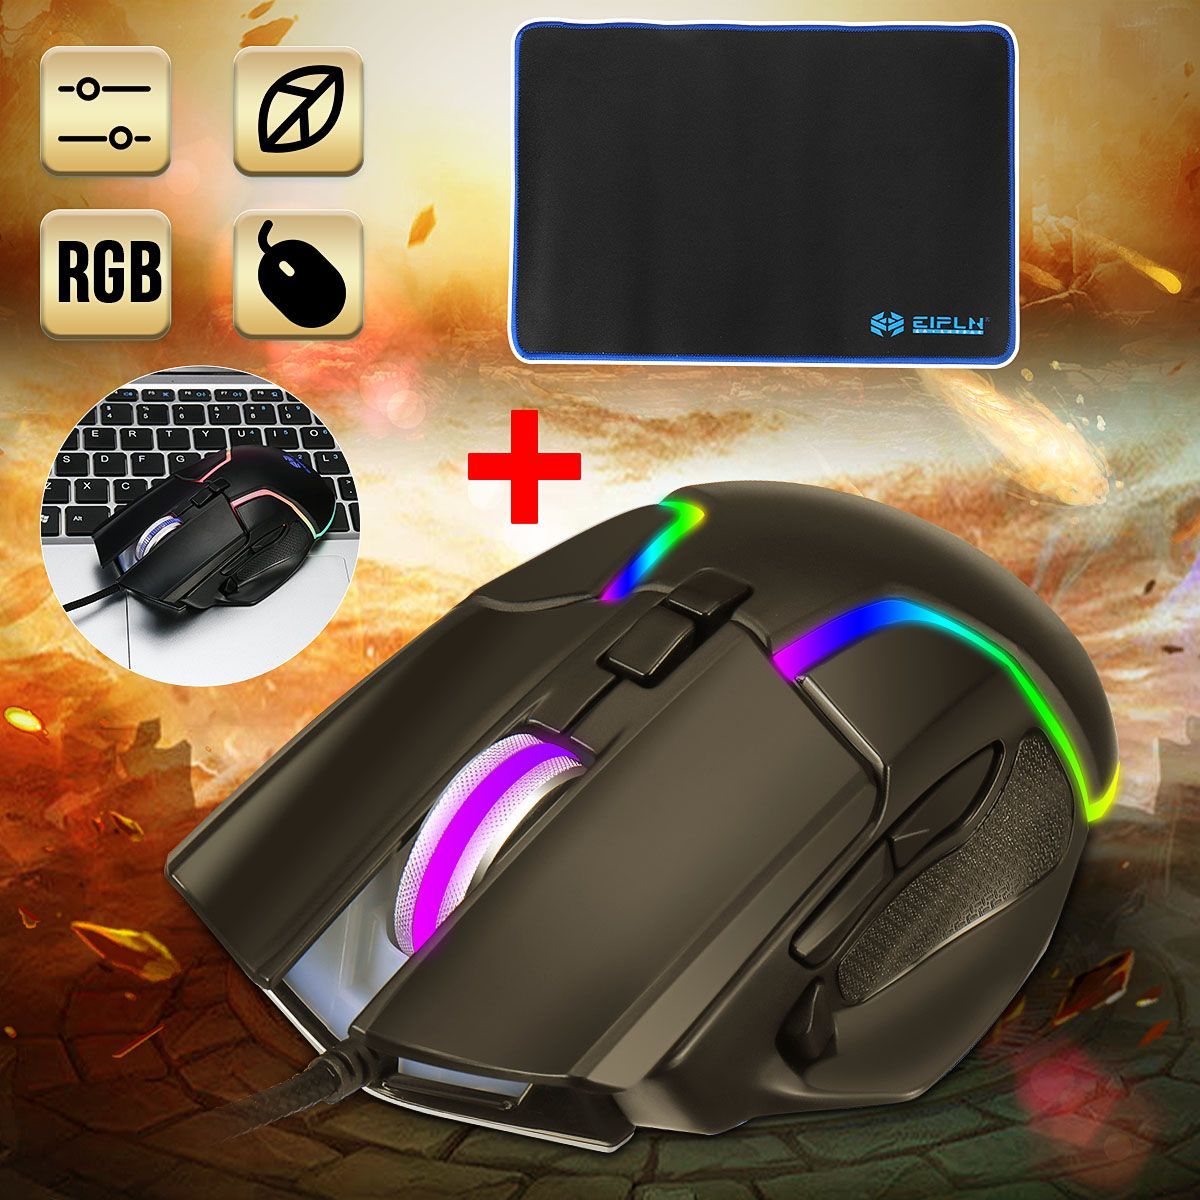 E75-6400DPI-8-Buttons-RGB-light-Gaming-Mose-with-Mose-Pad-for-PC-Laptop-1672525